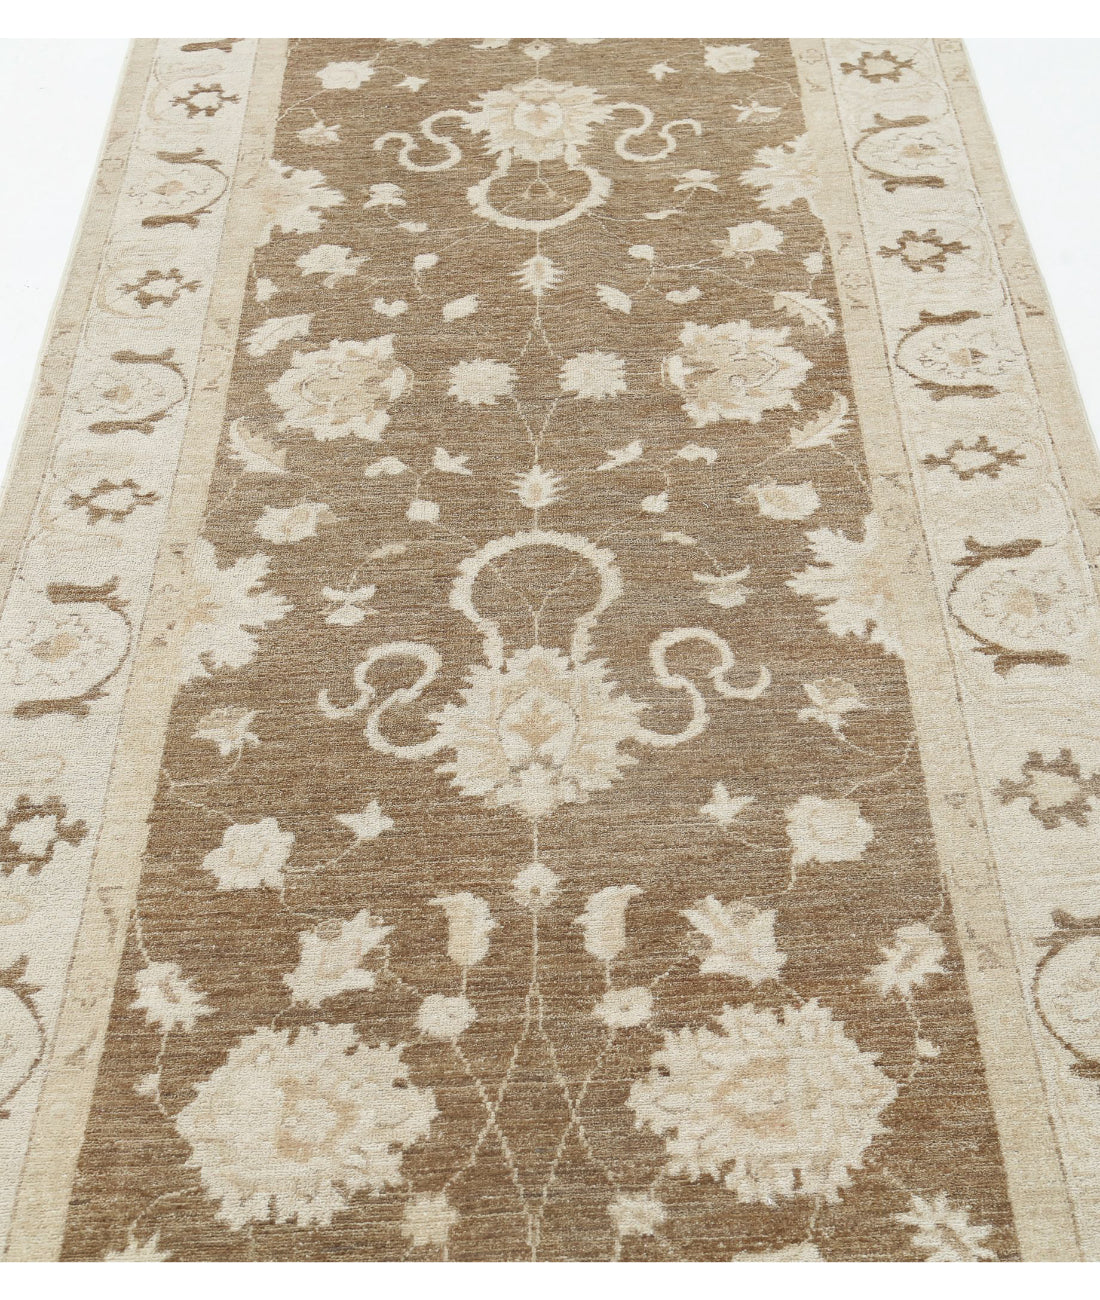 Hand Knotted Serenity Wool Rug - 3'9'' x 13'10'' 3'9'' x 13'10'' (113 X 415) / Brown / Ivory